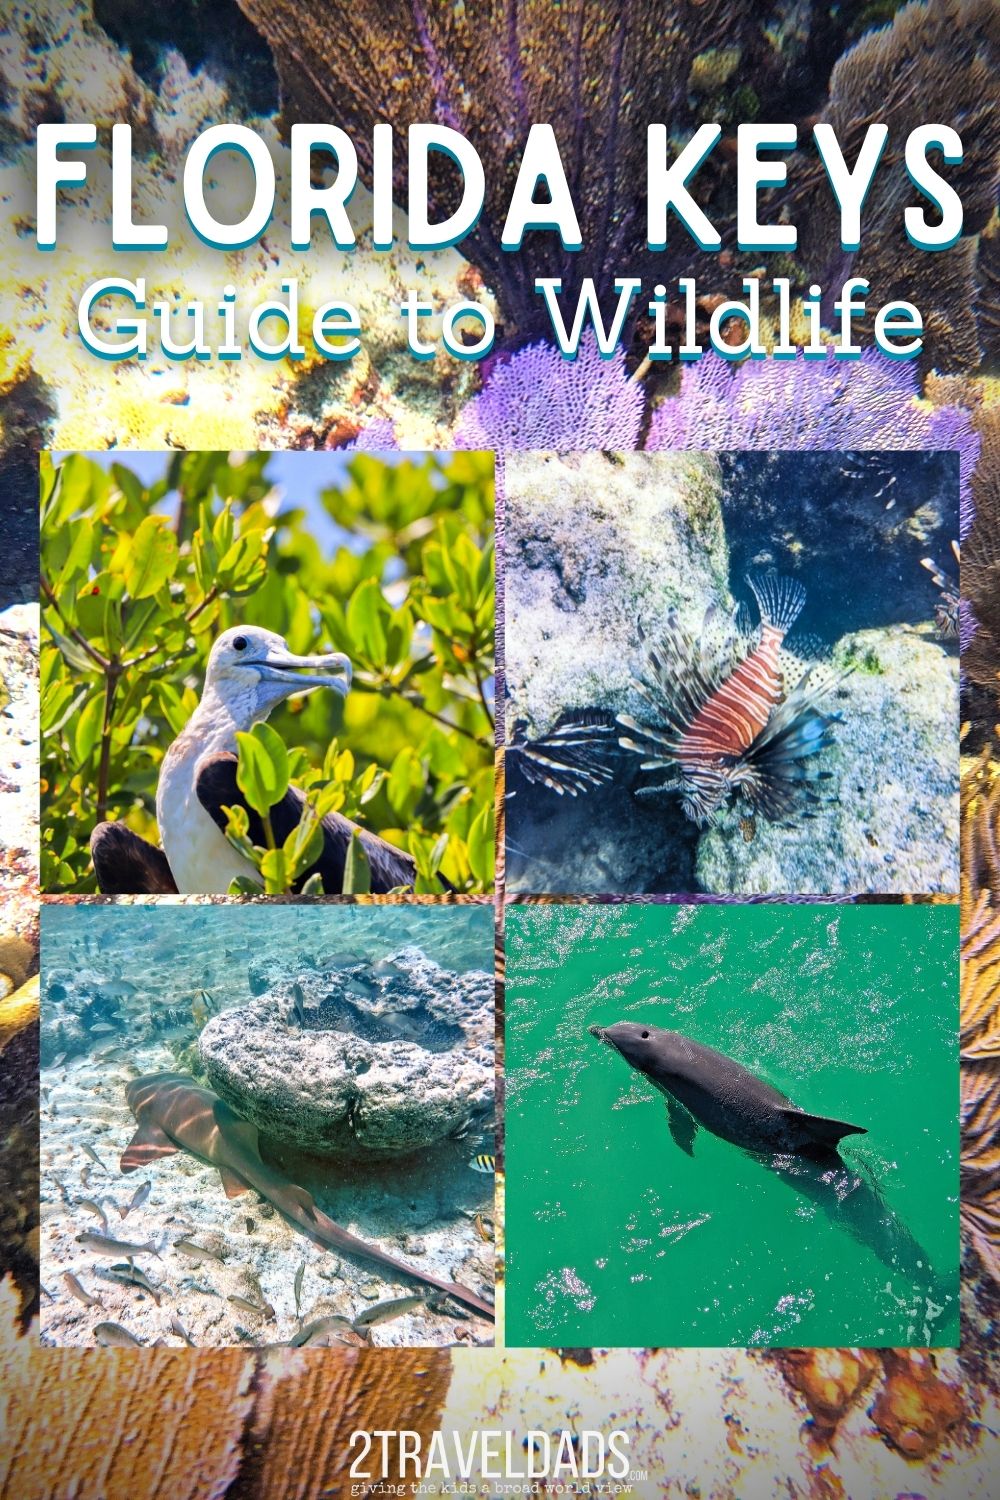 The wildlife in the Florida Keys is just as incredible as the turquoise waters and beautiful resorts. We've picked our favorite creatures to encounter, to dive with, and observe from the land. Tips for wildlife sighting and top tours for responsible wildlife experiences.